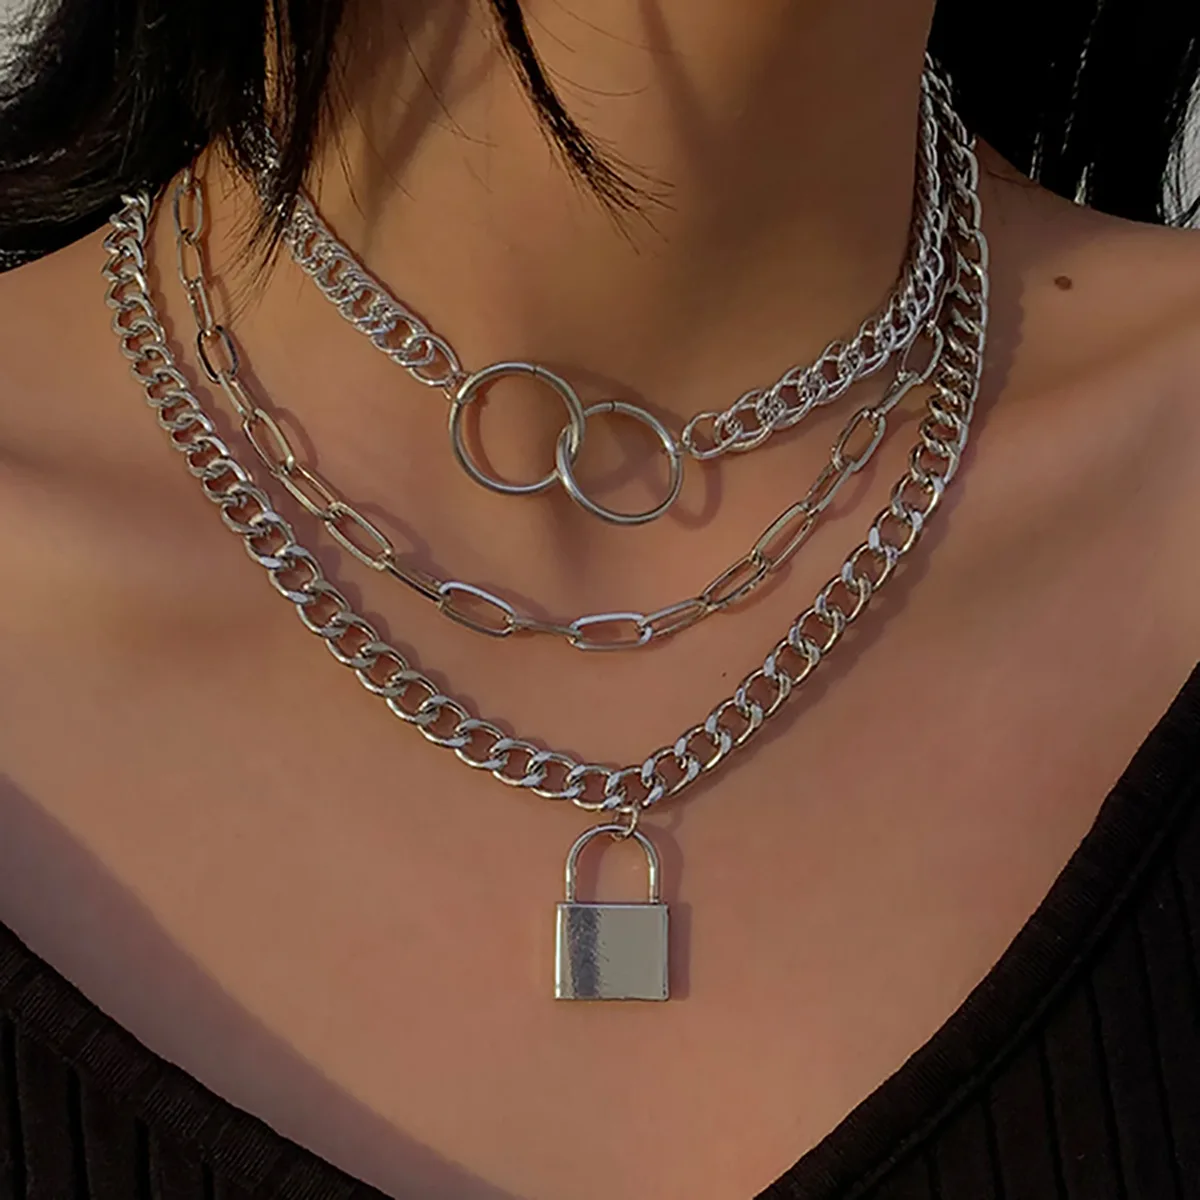 

Punk Curb Chains Lock Pendant Necklace Chic Hips Hops Multi Layered Chain Necklace Jewelry for Women Men